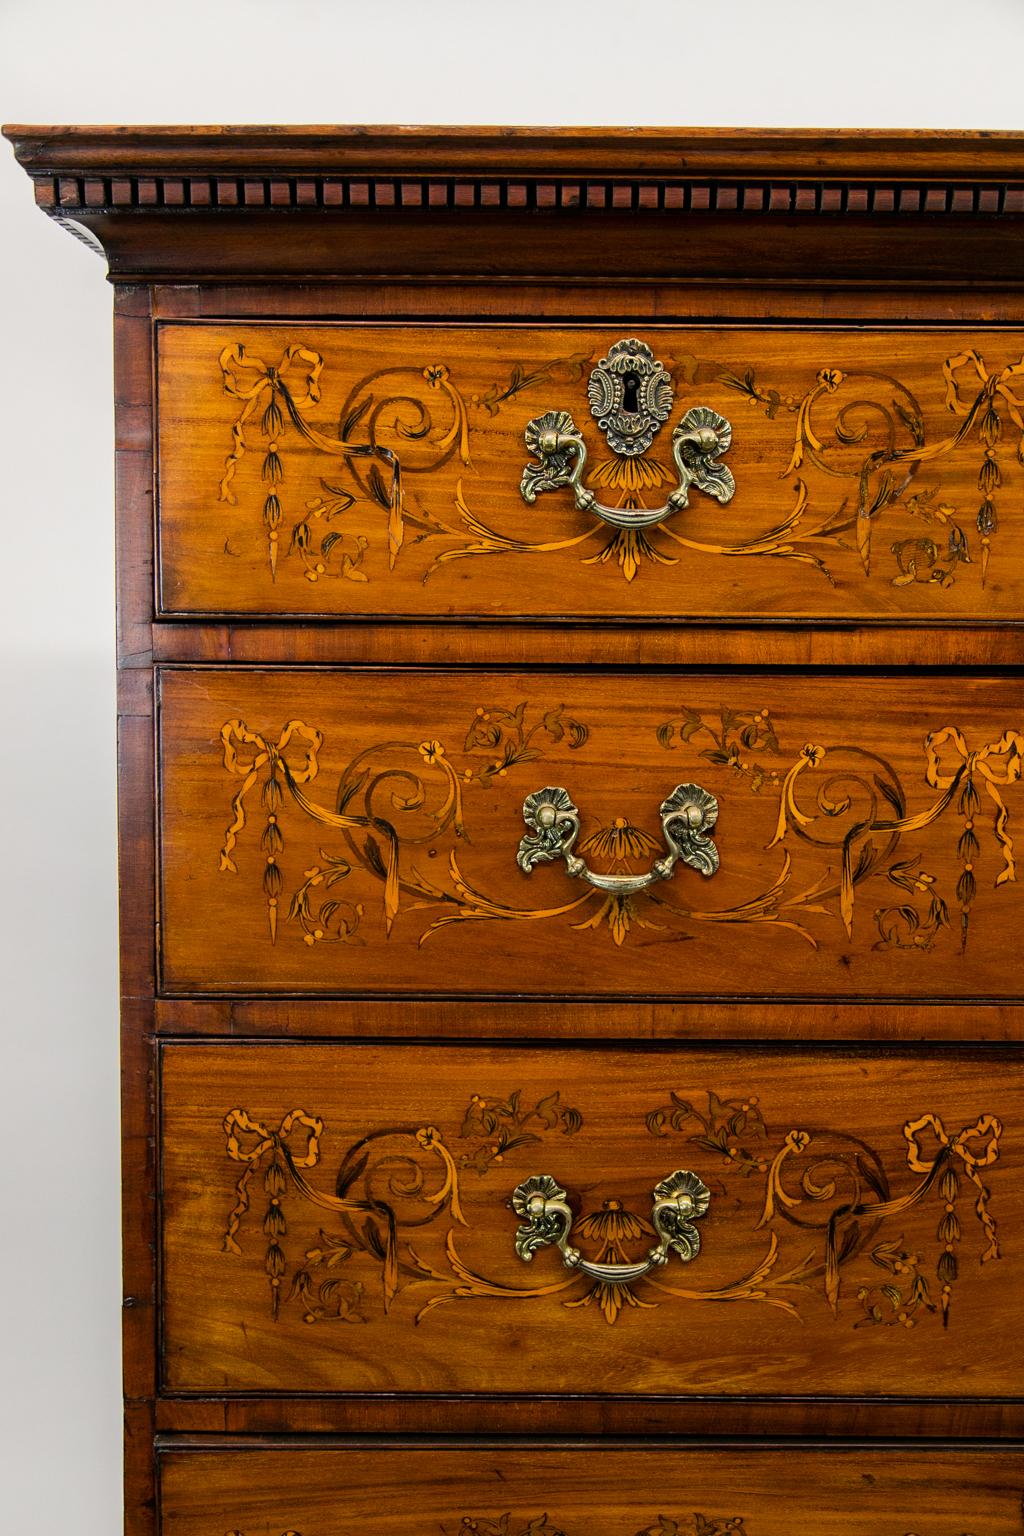 The drawers of this chest on frame have incised cockbeading and are inlaid with satinwood, ribbons, bellflowers, and arabesques. The base has inlaid fans in a scrolled apron. The legs are turned with stylized ionic capitals and terminate in a